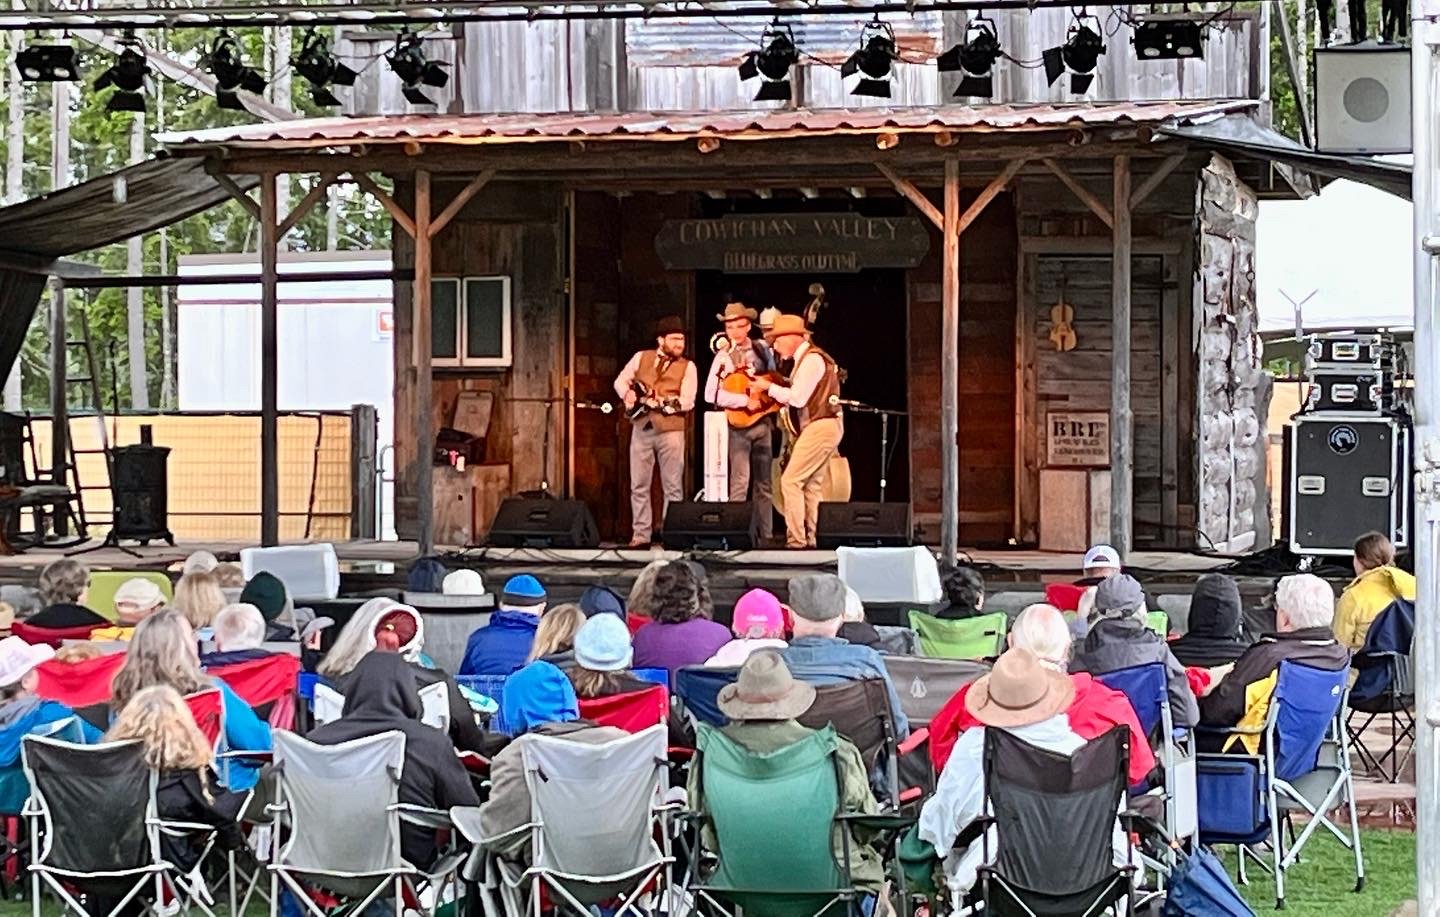 The Lonesome Town Painters performing live at Cowichan Valley Bluegrass Festival, Laketown Ranch Lake Cowichan 2022